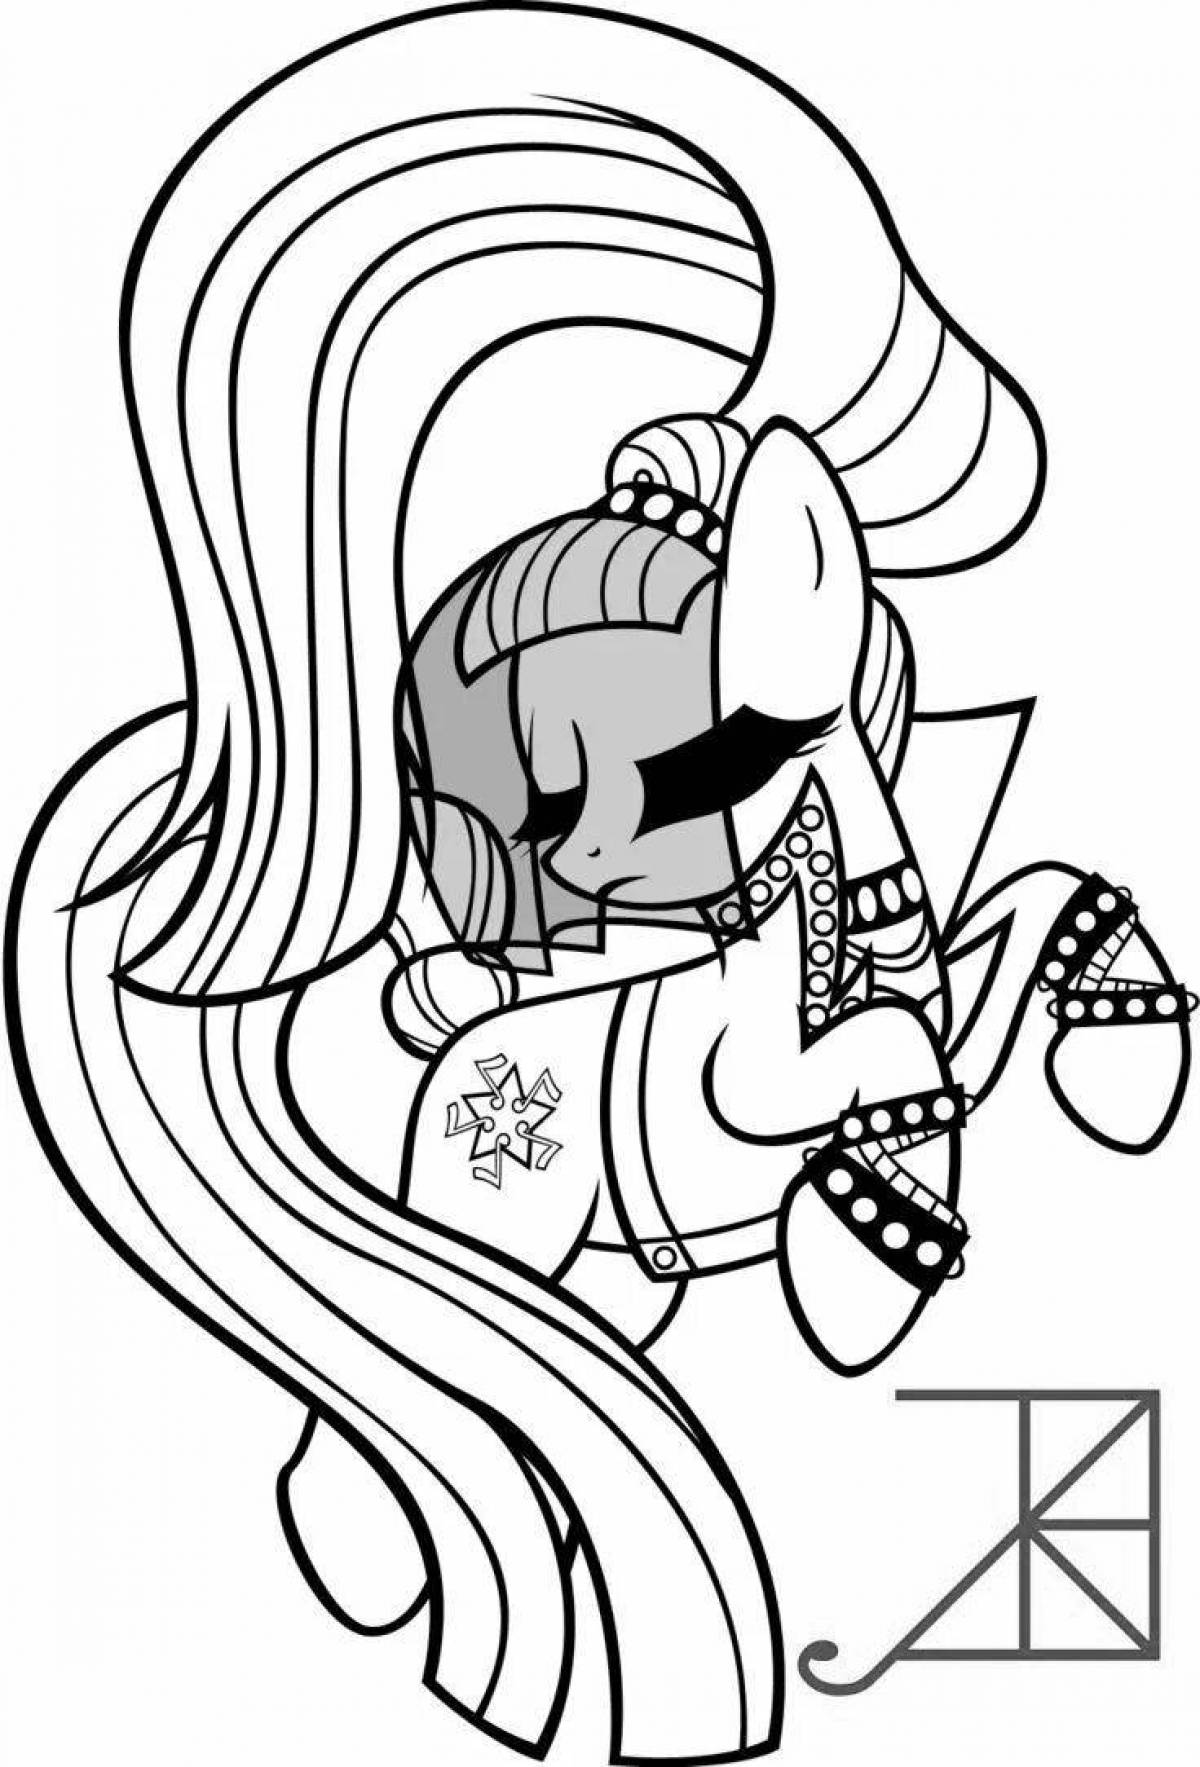 Coloring page savage my little pony